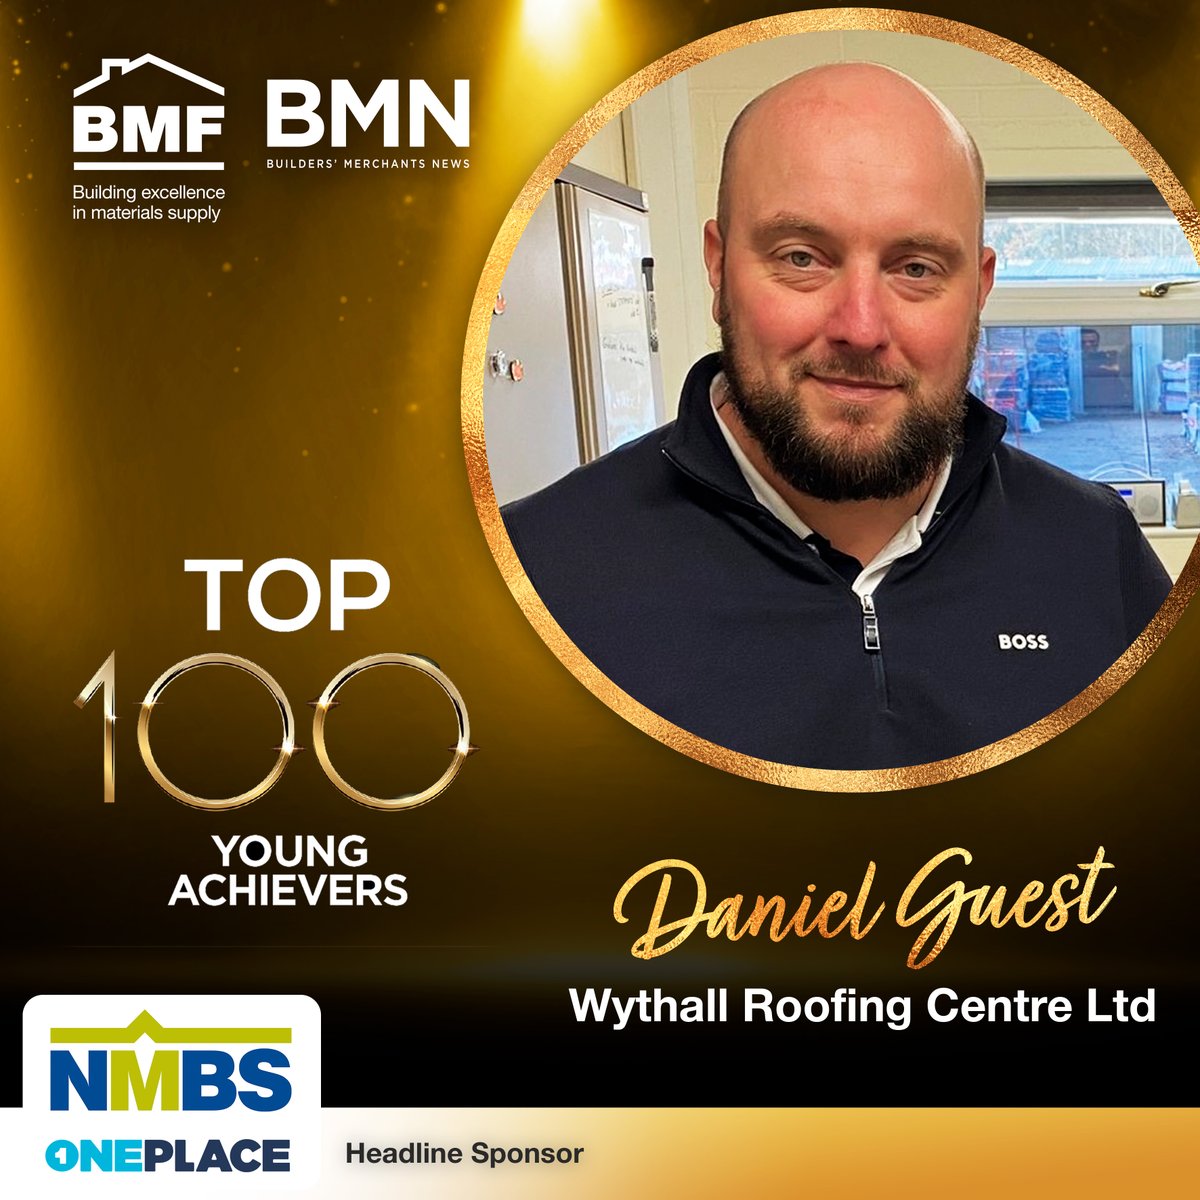 Our next BMF and @BMerchantsNews Top 100 Young Achiever is Daniel Guest, General Manager at @wythallroofing Our Top 100 Young Achiever nominees are kindly sponsored by our head sponsor, @NationalMerch #Top100YoungAchiever